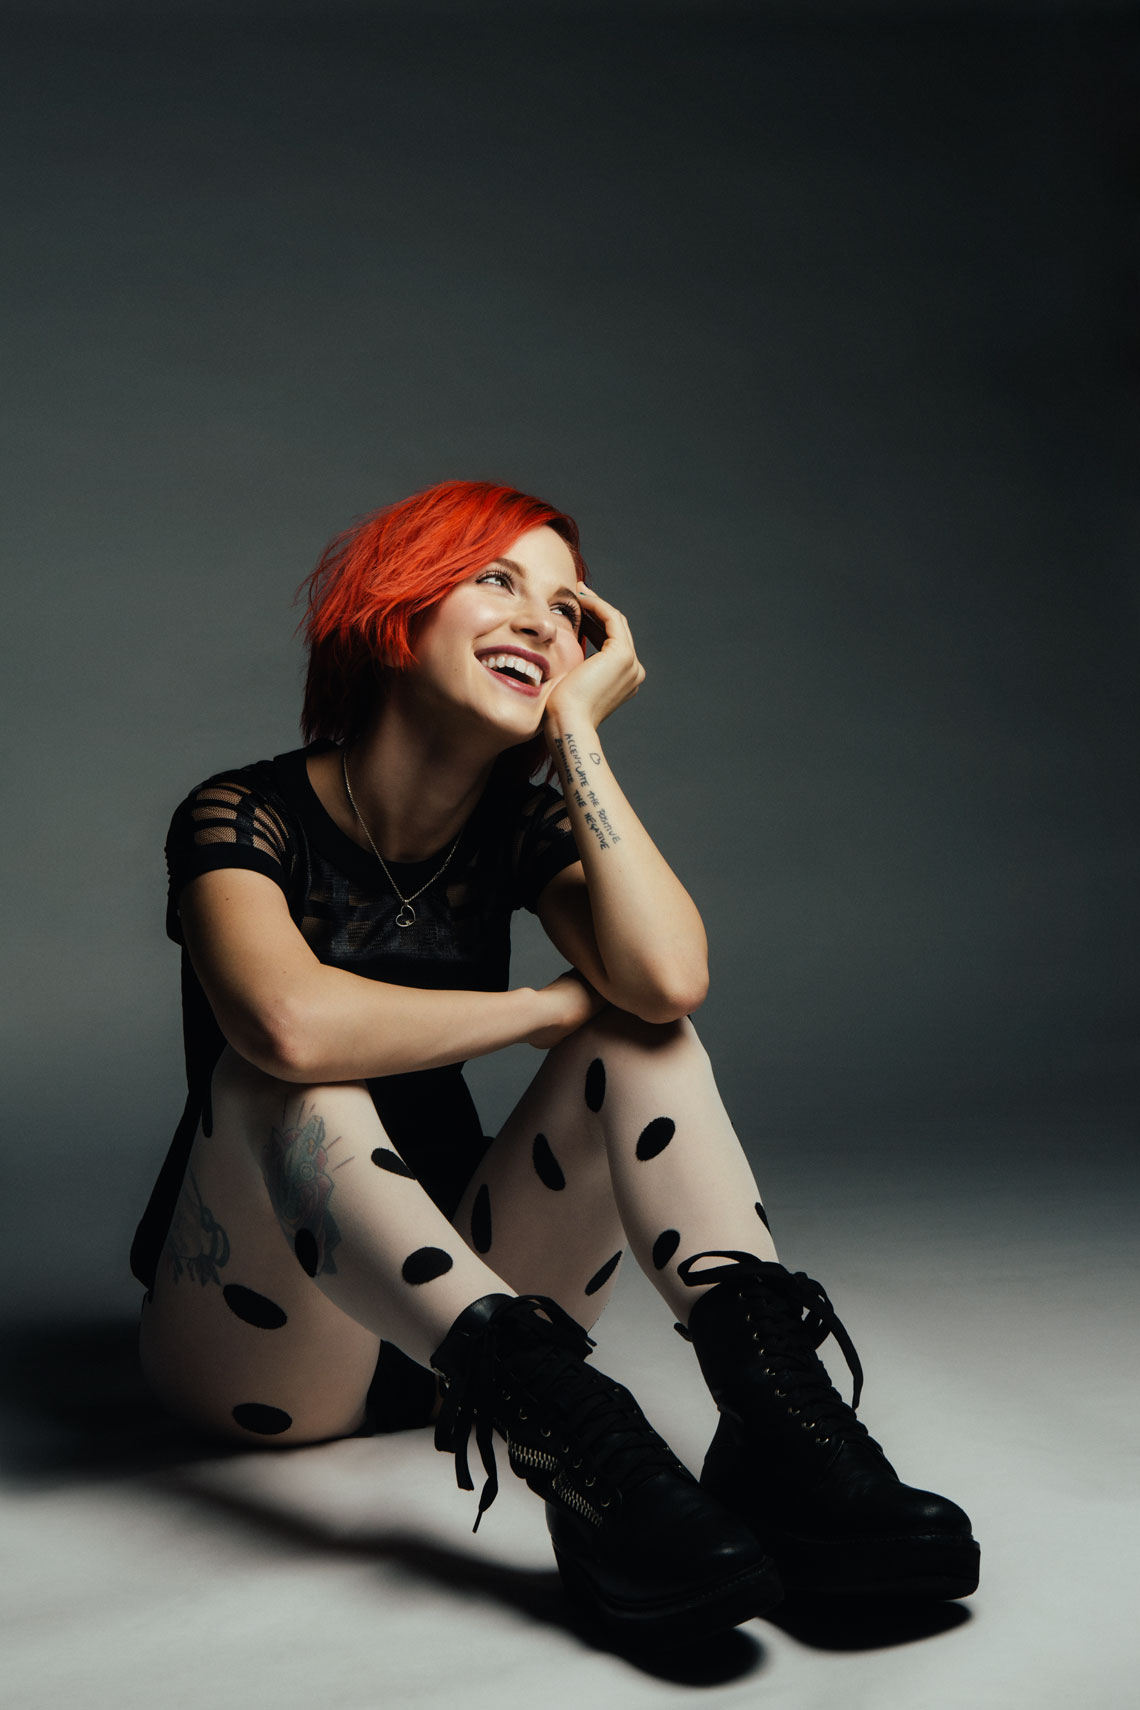 Hayley Nichole Williams is an American singer, songwriter, musician